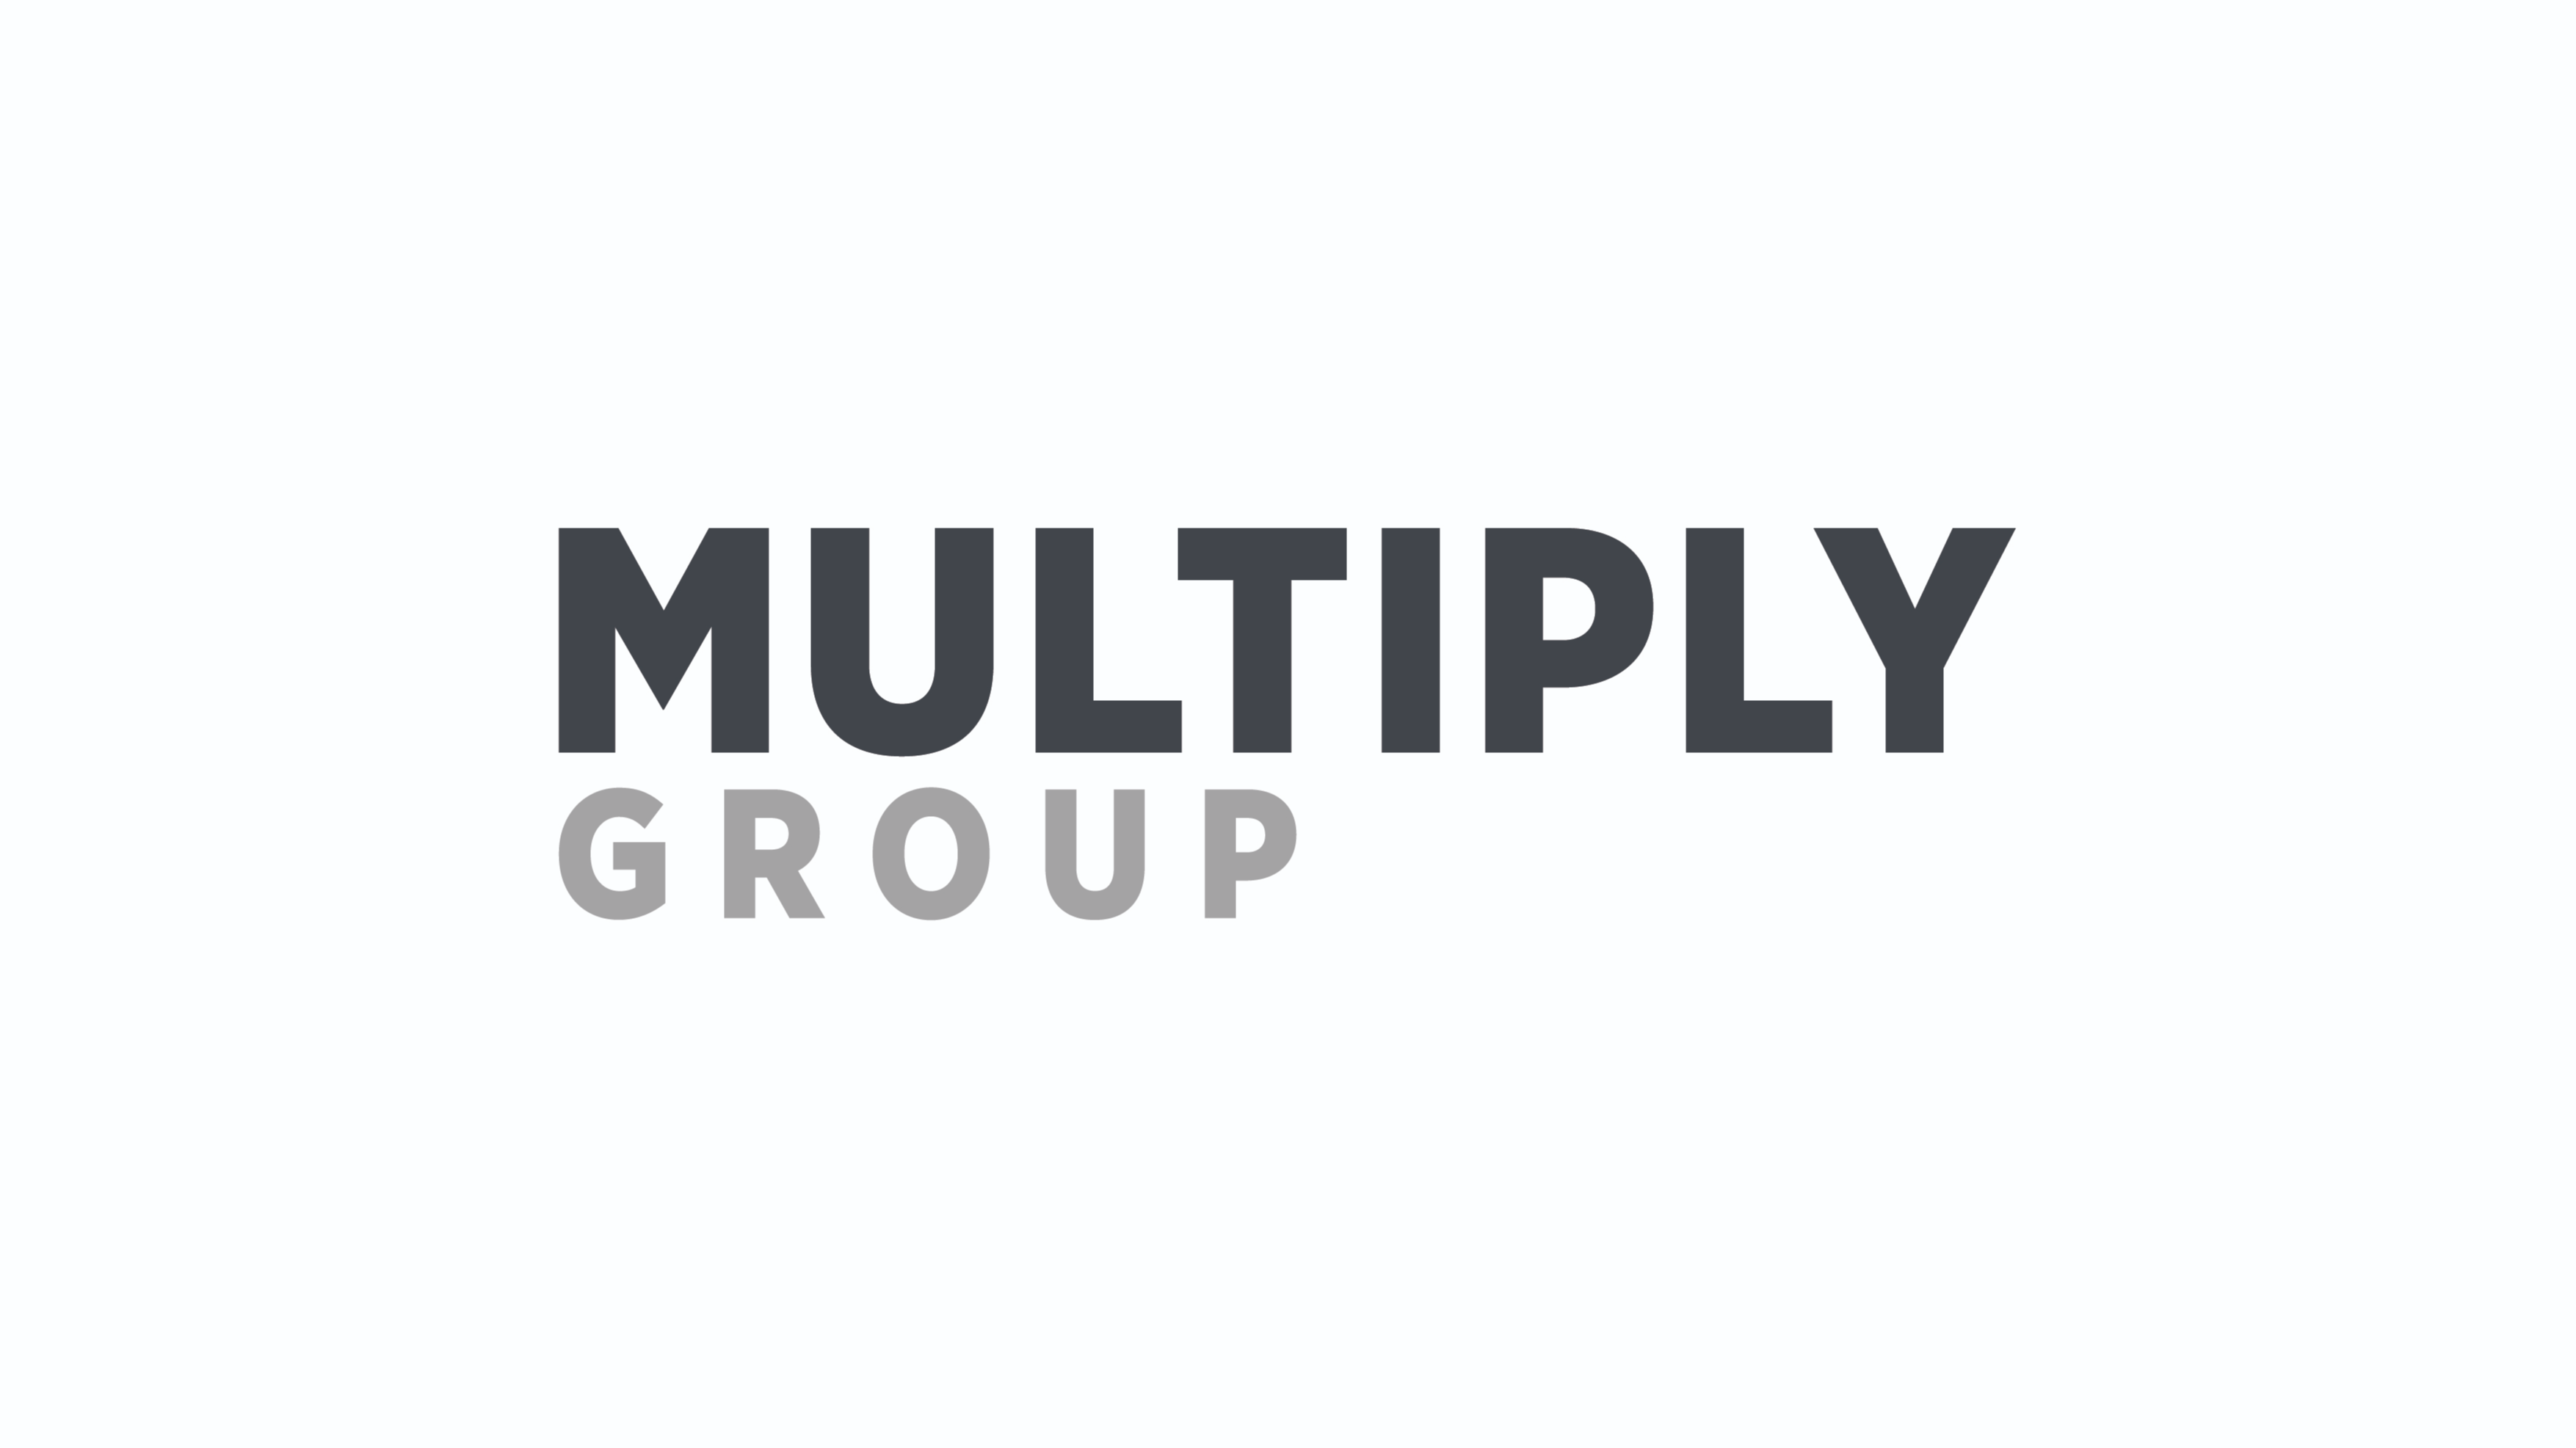 https://adgully.me/post/1951/multiply-group-reports-net-profit-excluding-fair-value-gains